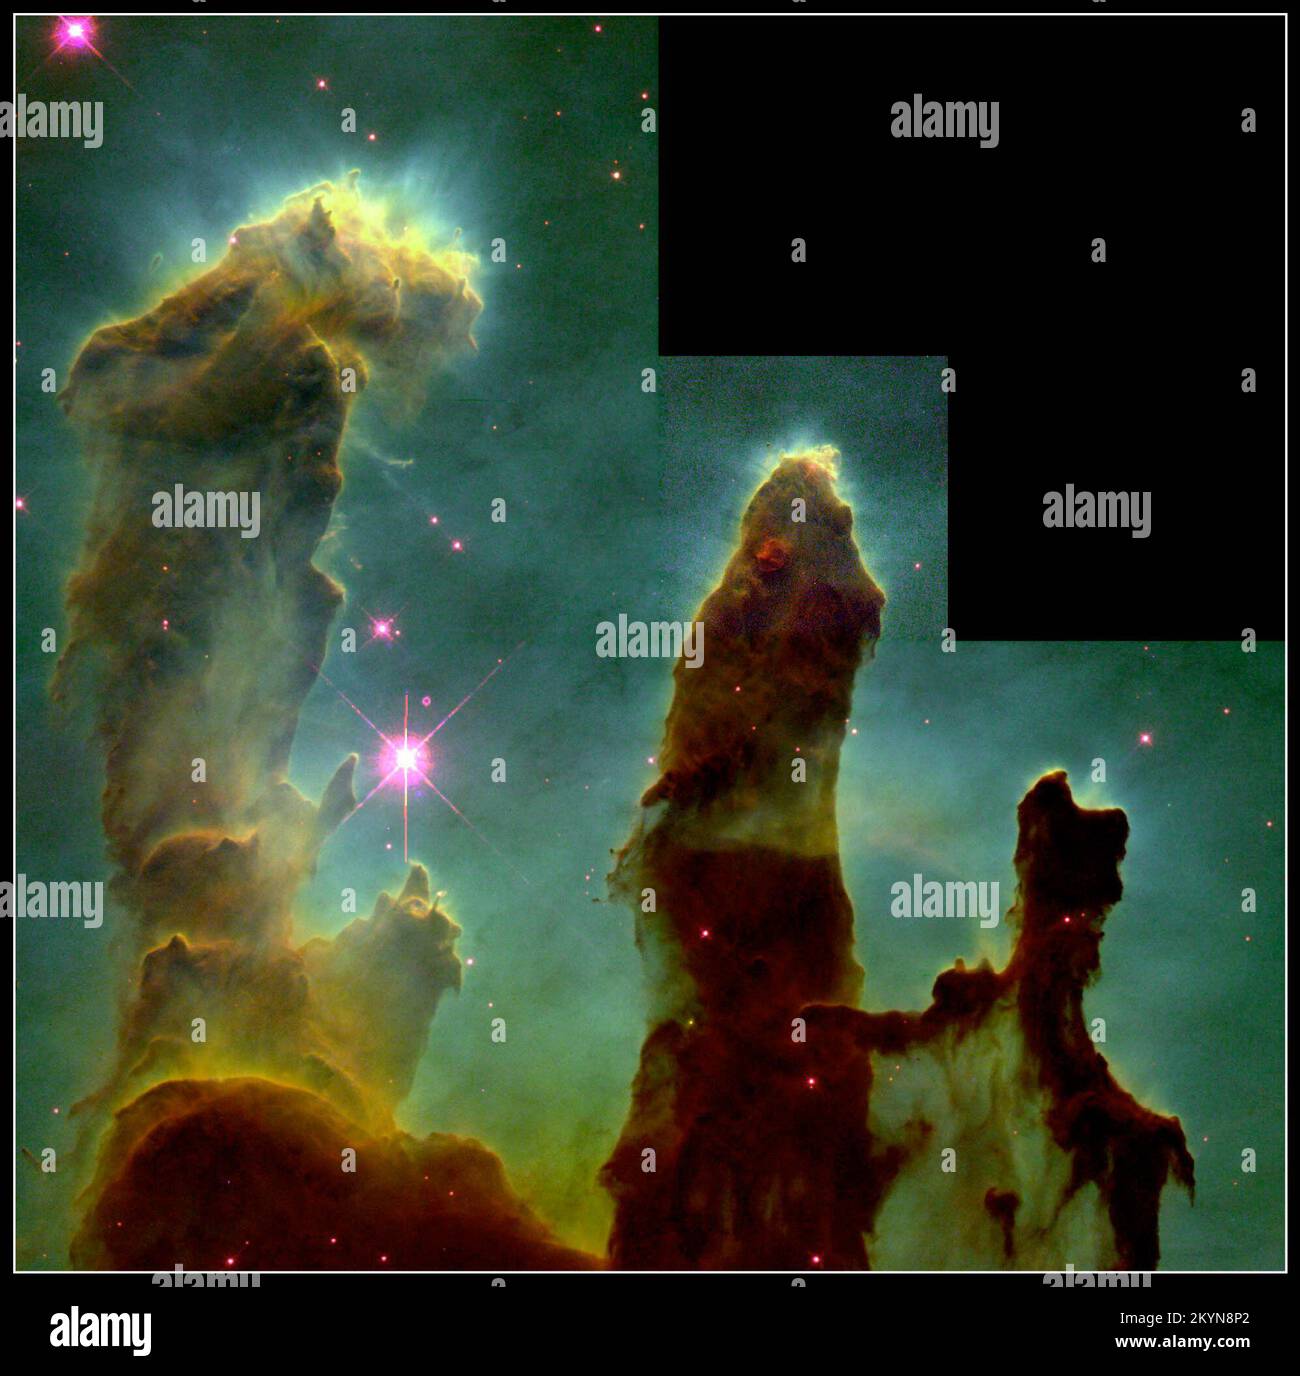 These eerie, dark pillar-like structures are columns of cool interstellar hydrogen gas and dust that are also incubators for new stars. The pillars protrude from the interior wall of a dark molecular cloud like stalagmites from the floor of a cavern. They are part of the 'Eagle Nebula' (also called M16 -- the 16th object in Charles Messier's 18th century catalog of 'fuzzy' objects that aren't comets), a nearby star-forming region 7,000 light-years away in the constellation Serpens. Ultraviolet light is responsible for illuminating the convoluted surfaces of the columns and the ghostly streamer Stock Photo